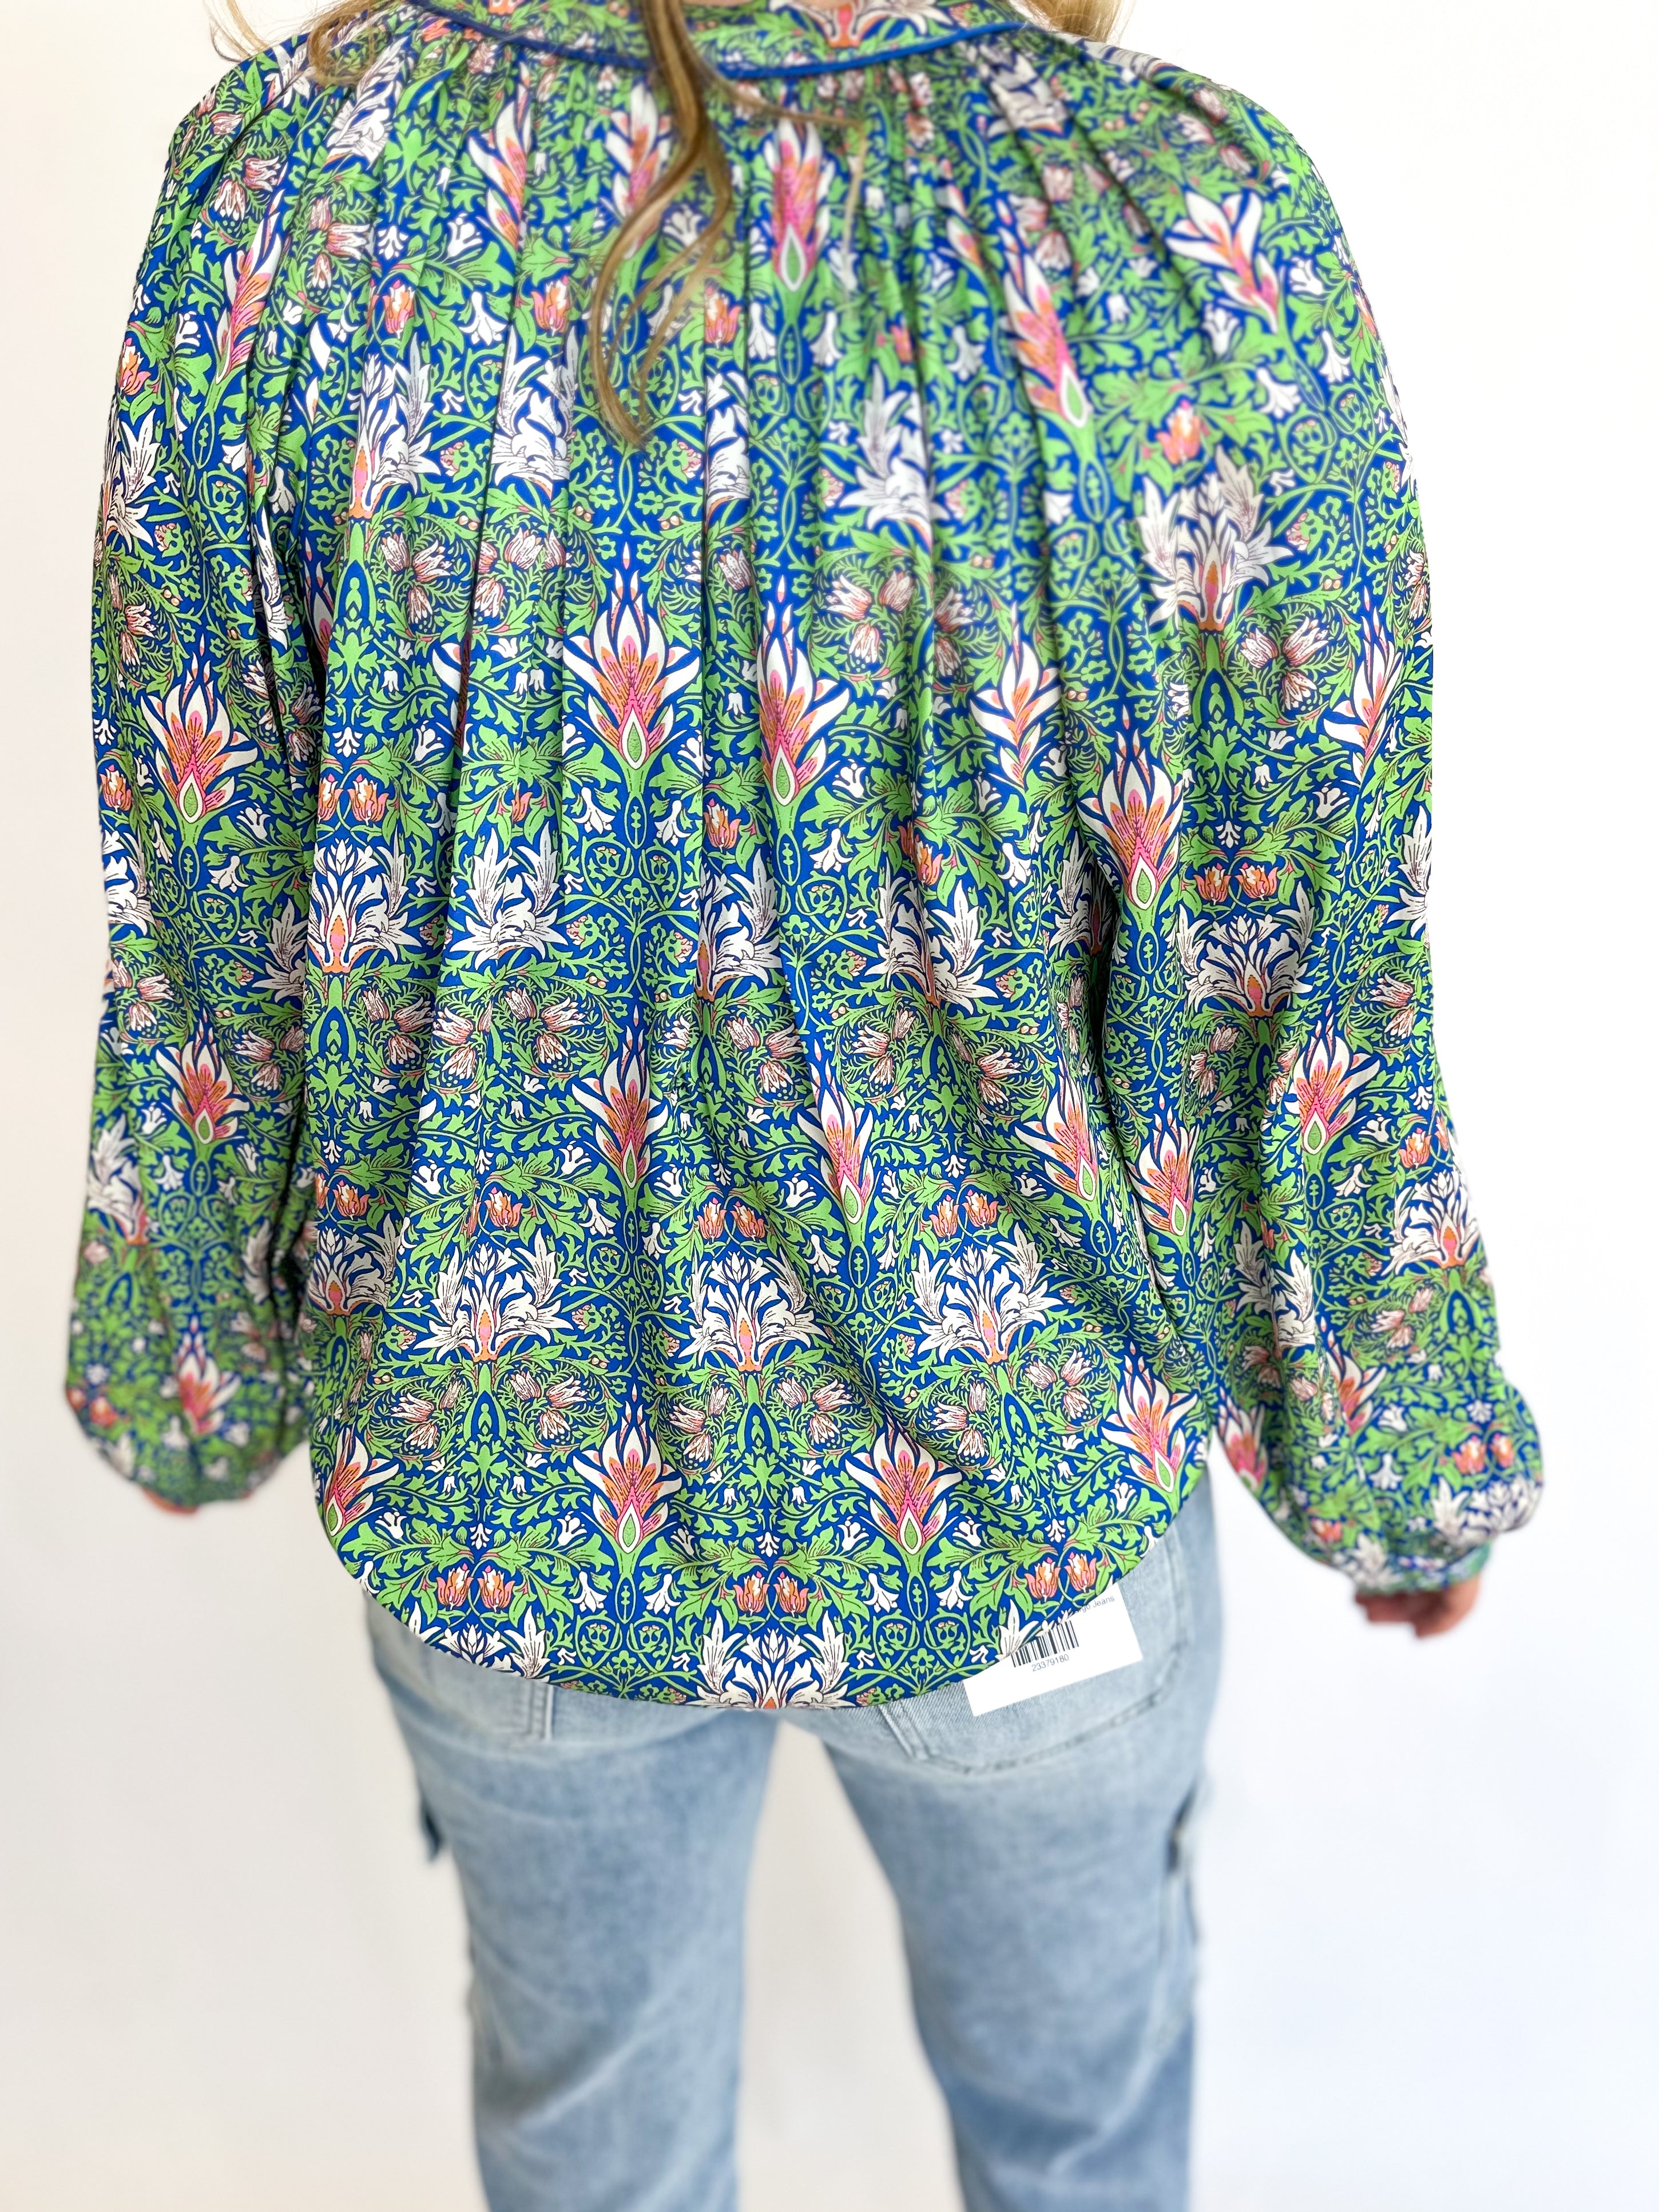 Blue Green Floral Blouse-200 Fashion Blouses-CURRENT AIR CLOTHING-July & June Women's Fashion Boutique Located in San Antonio, Texas